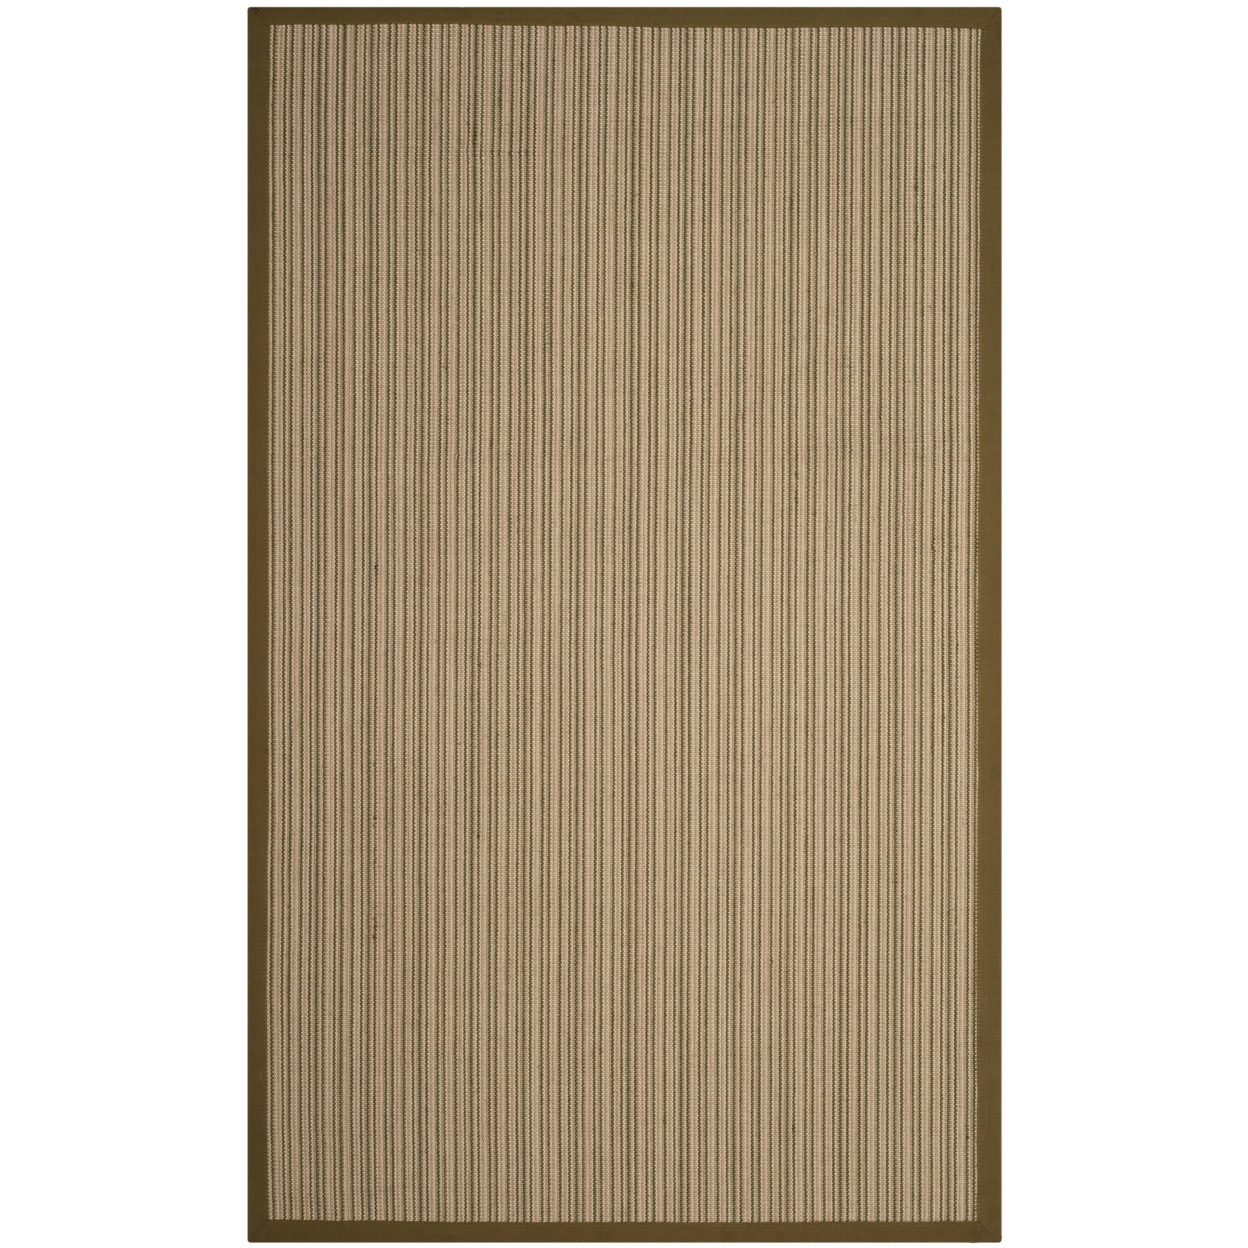 SAFAVIEH Natural Fiber Collection NF132A Multi/Green Rug - 4' X 6'